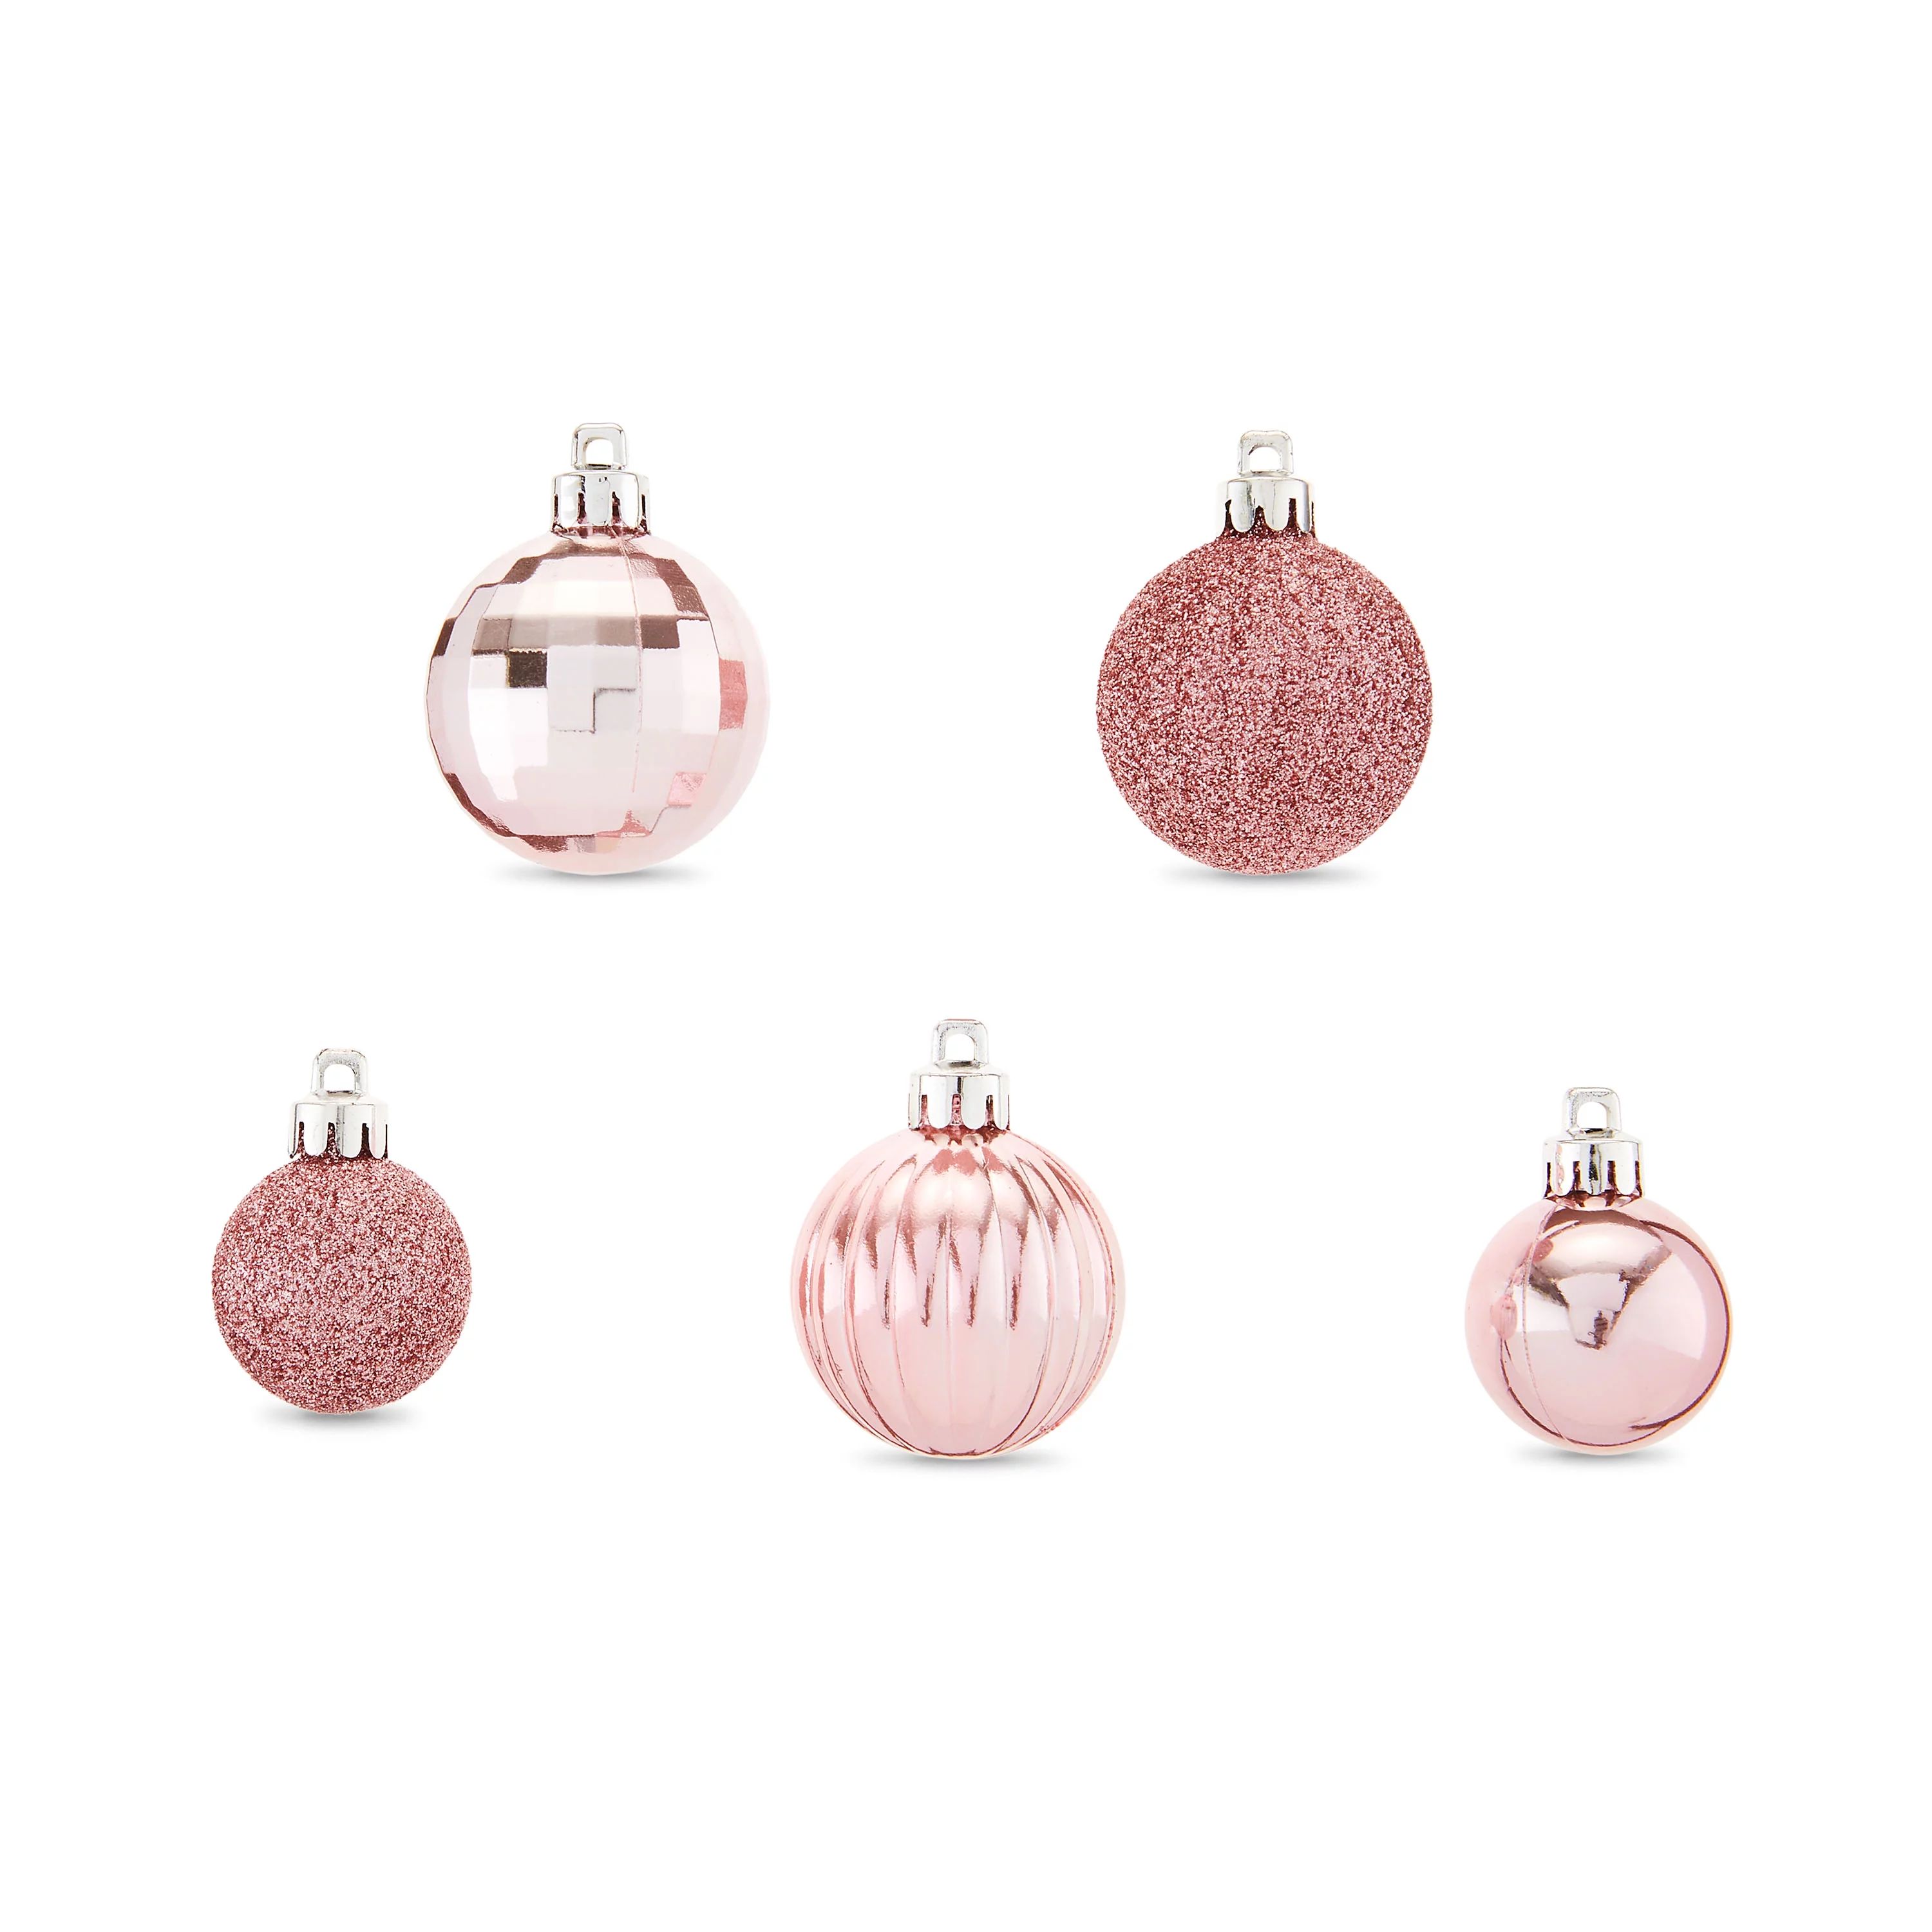 Mini Blush Shatterproof Christmas Ornaments, 20 Count, by Holiday Time | Walmart (US)